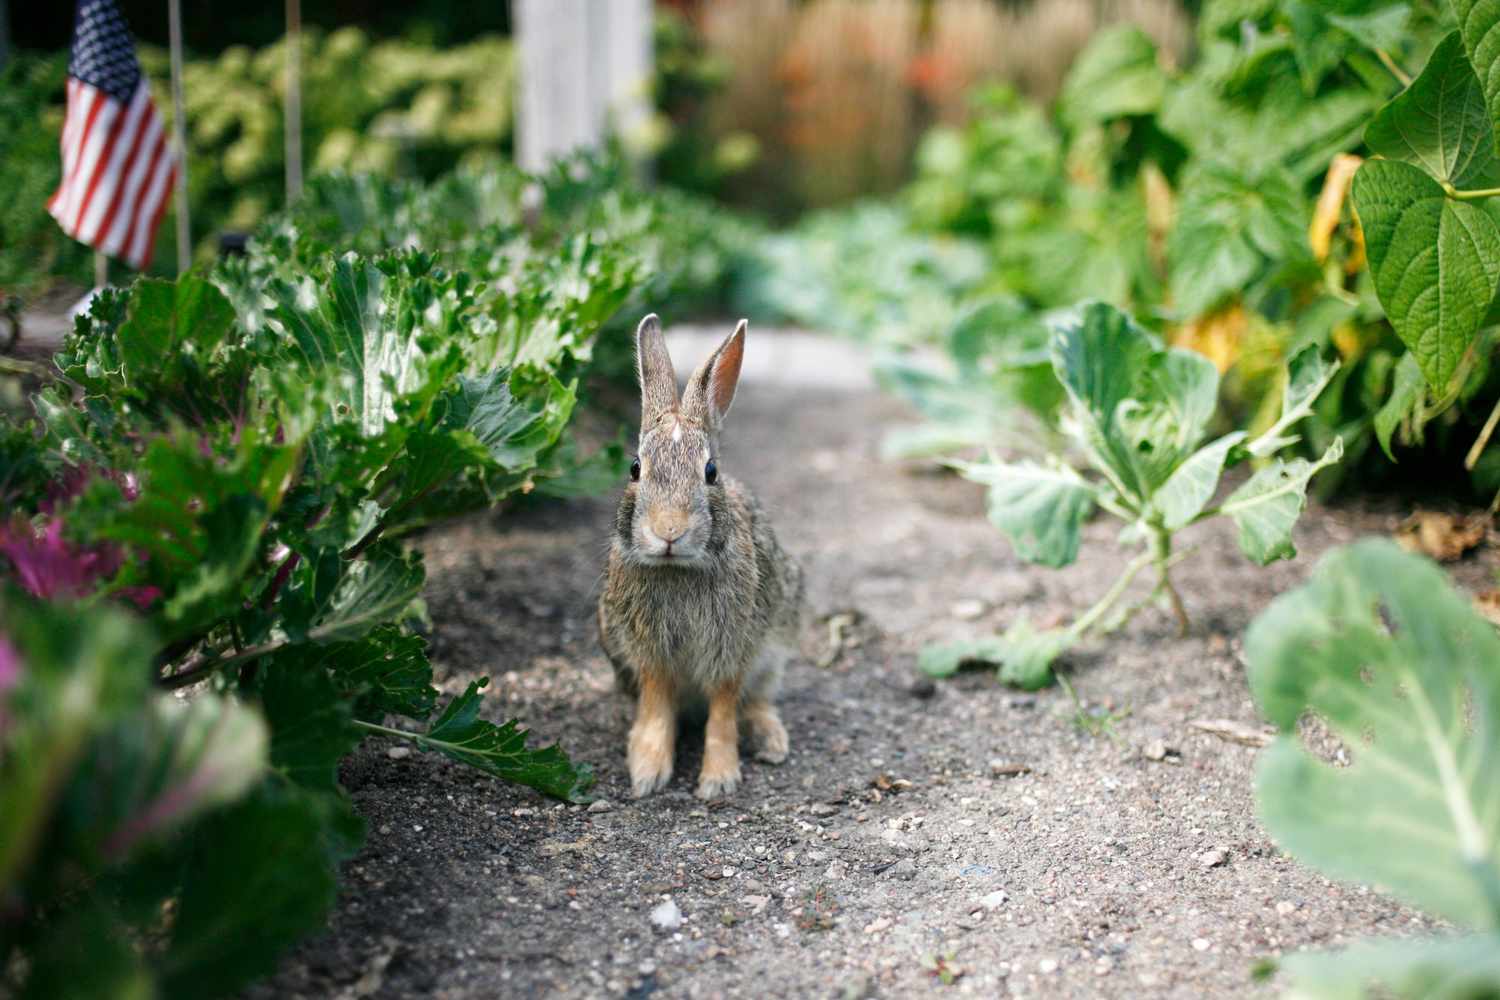 How To Keep Rabbits Out Of My Garden